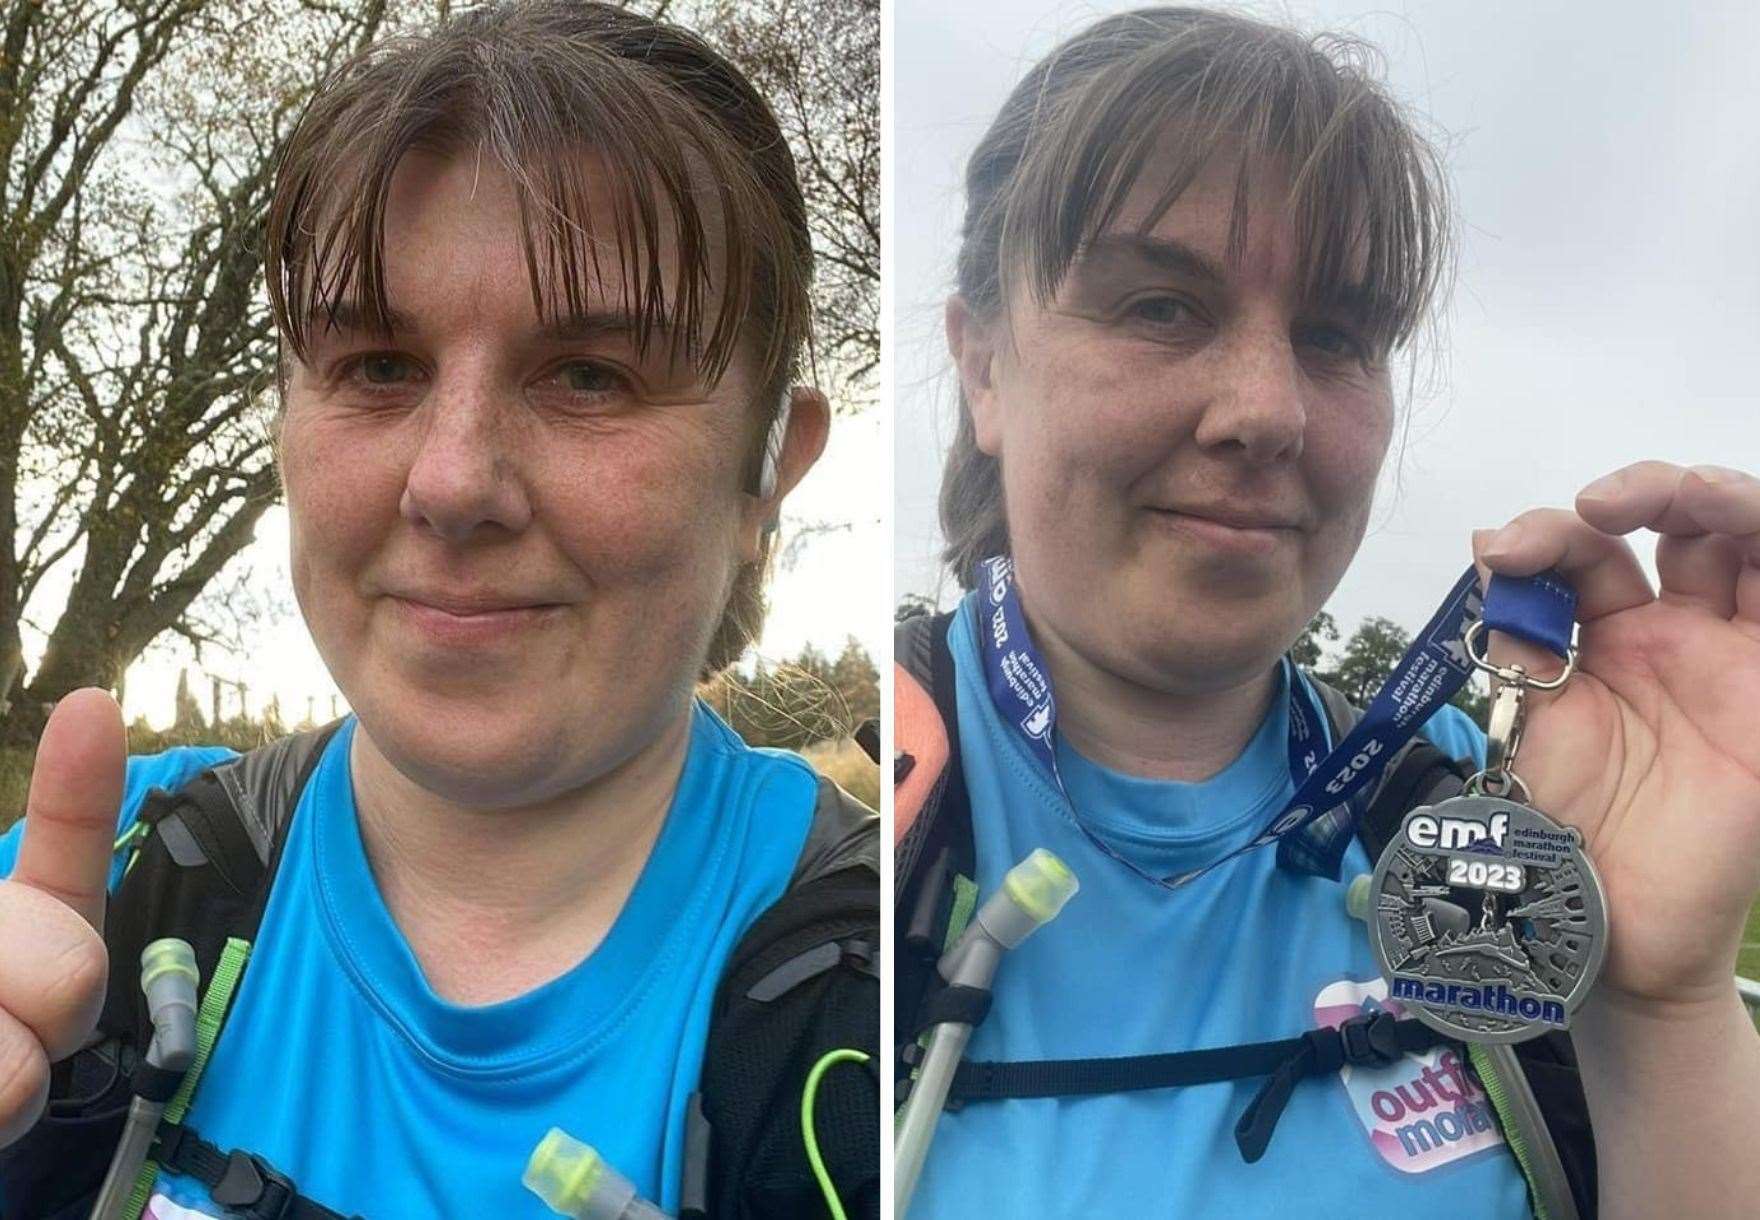 Emma taking part in the Speyside Way 50k (left) and with her medal for finishing the Edinburgh Marathon (right).